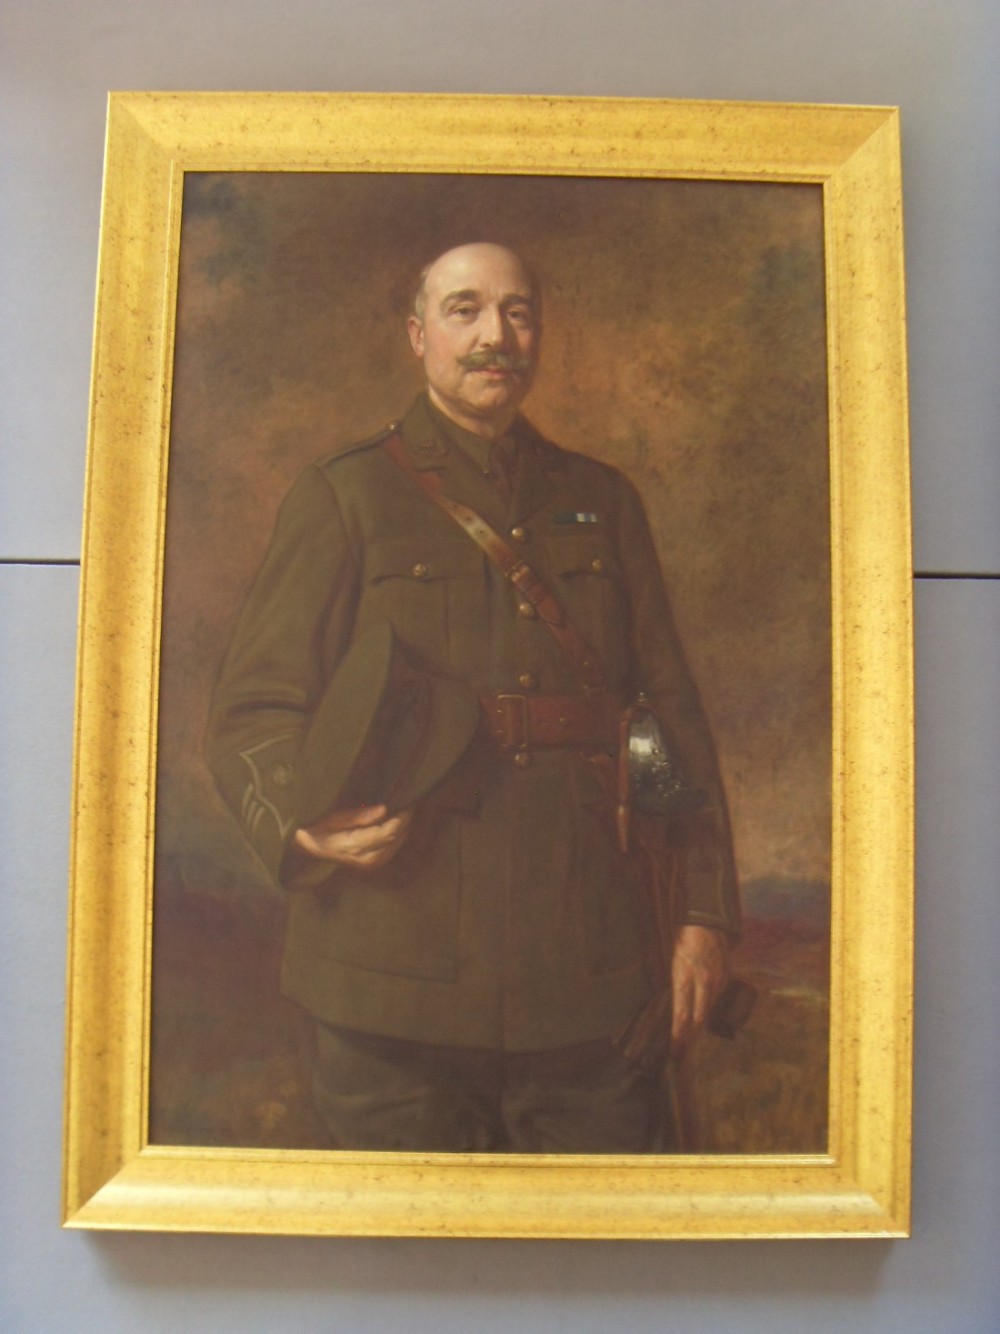 ww1 military oil portrait painting of army major warwickshire yeomanry regiment by artist jbernard munns 57 x 41 inches